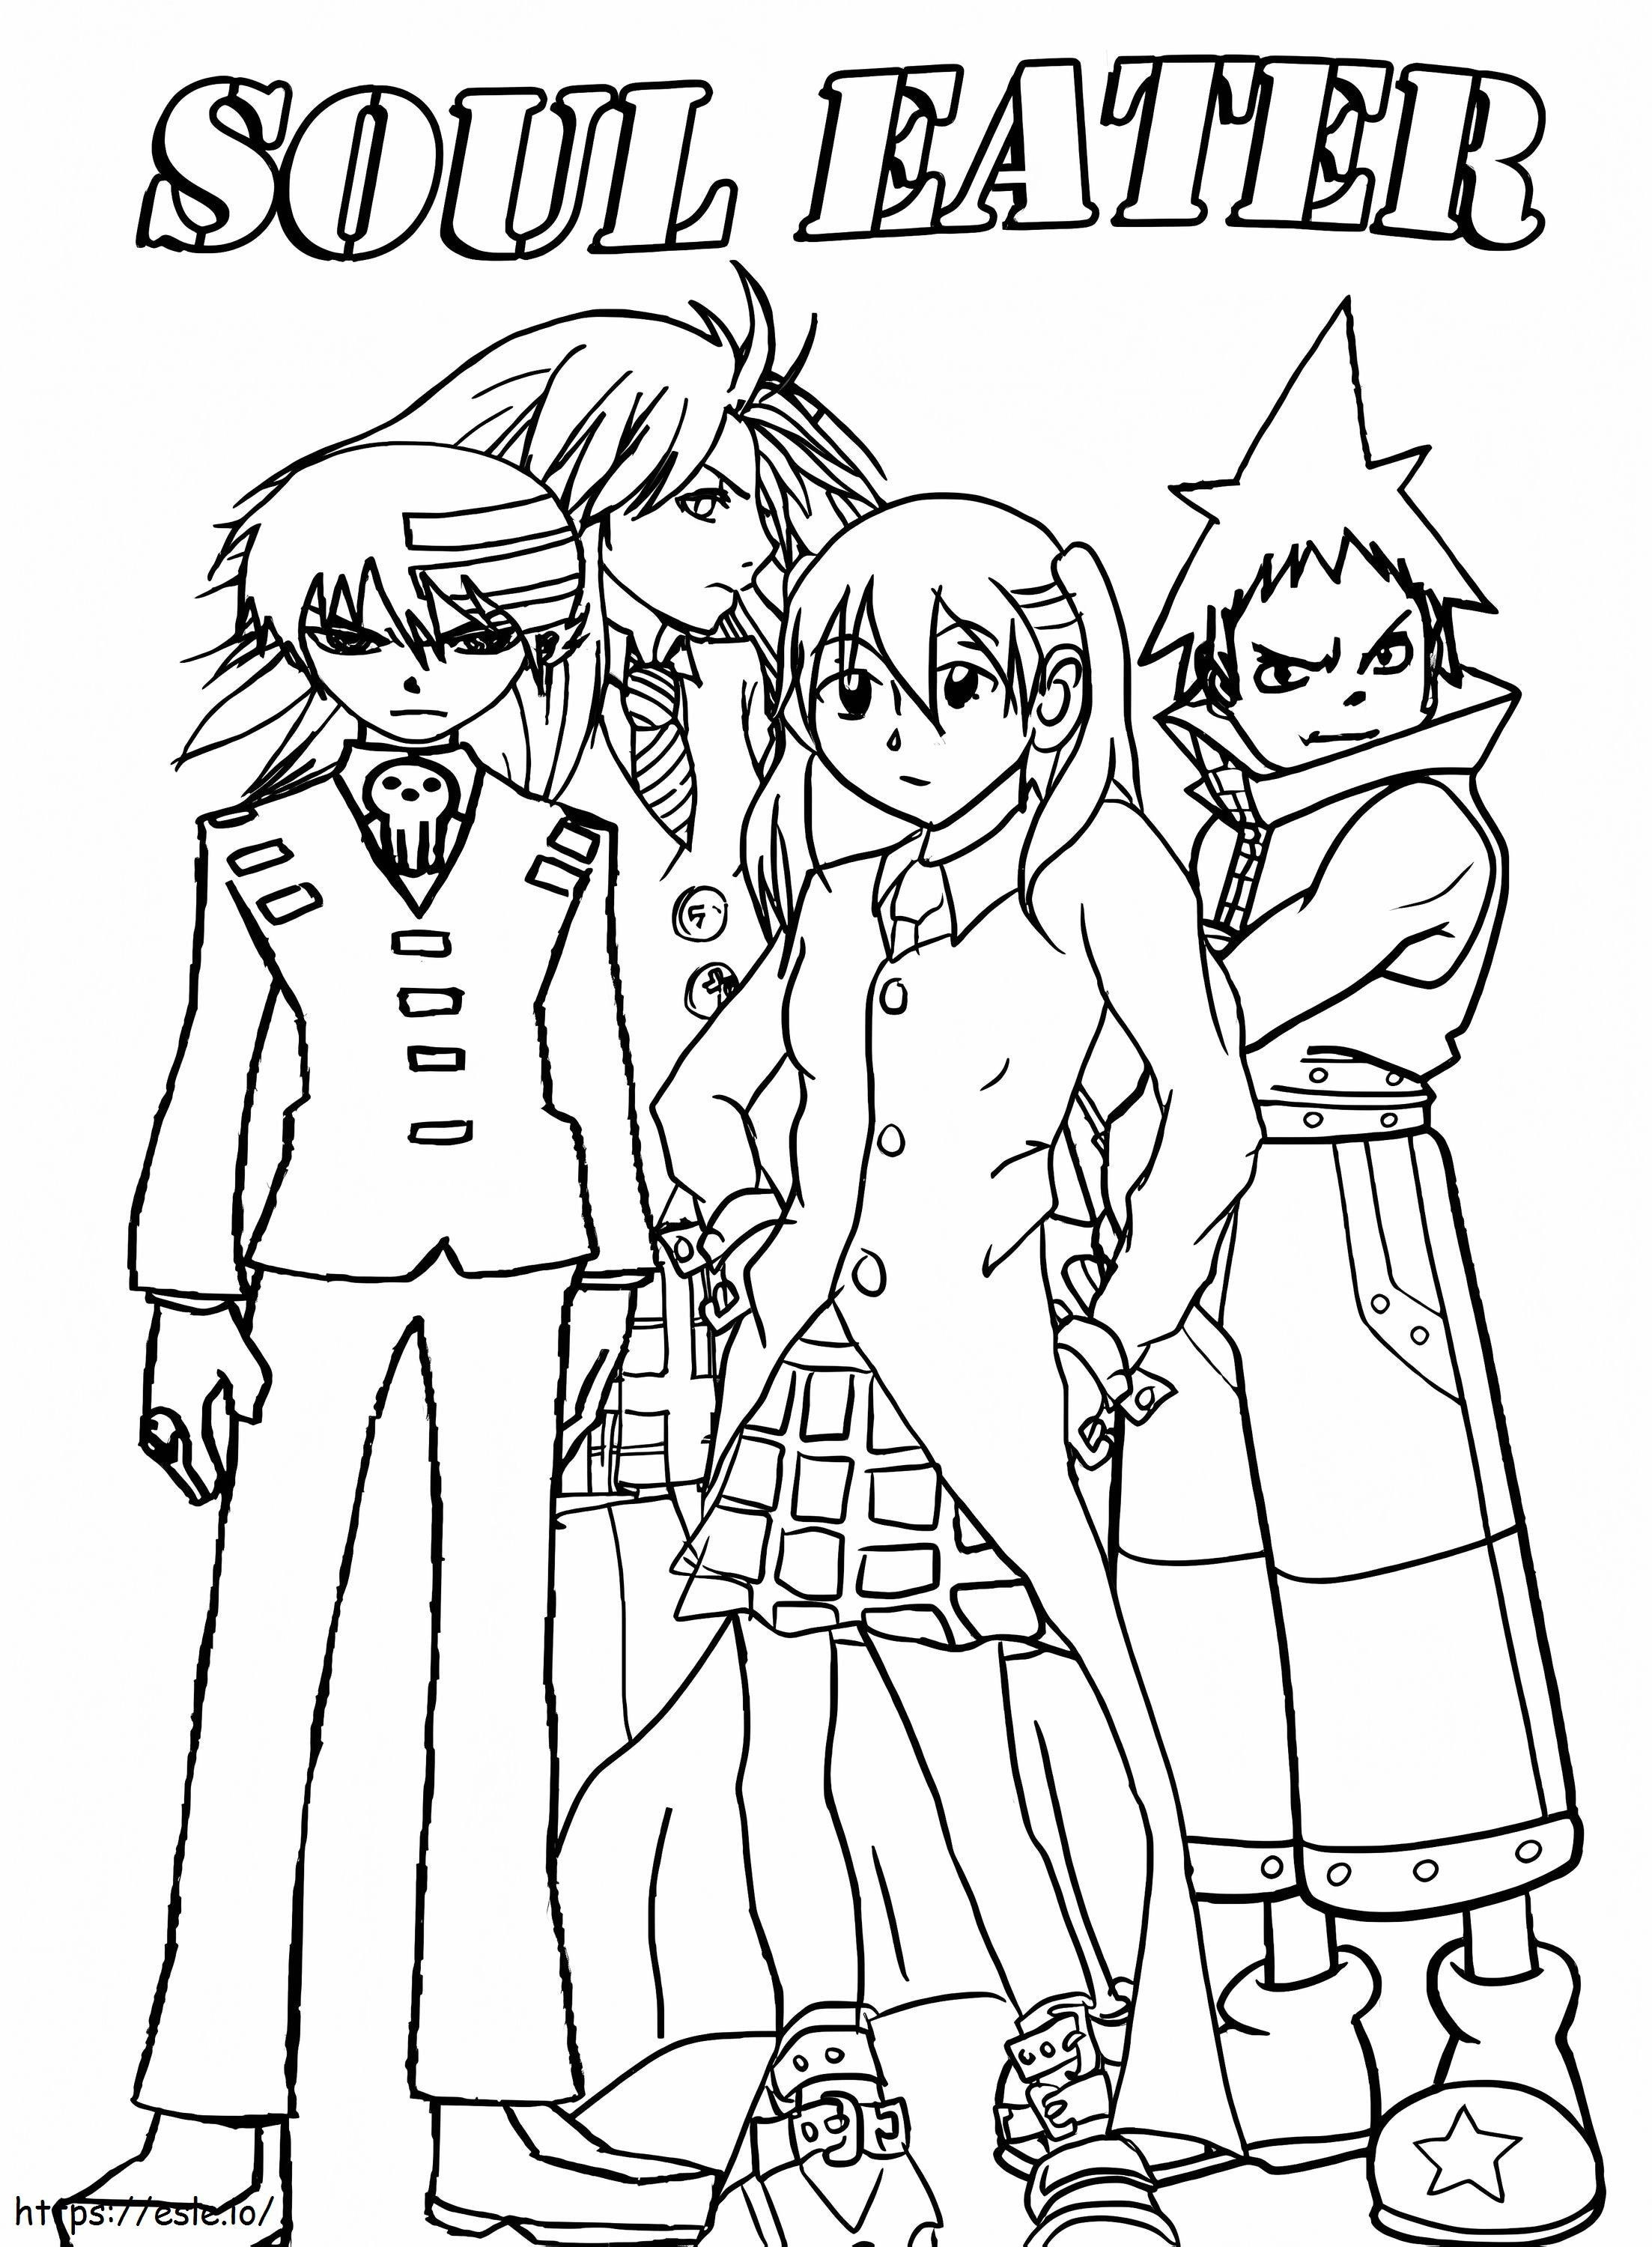 Soul Eater Movie Characters coloring page